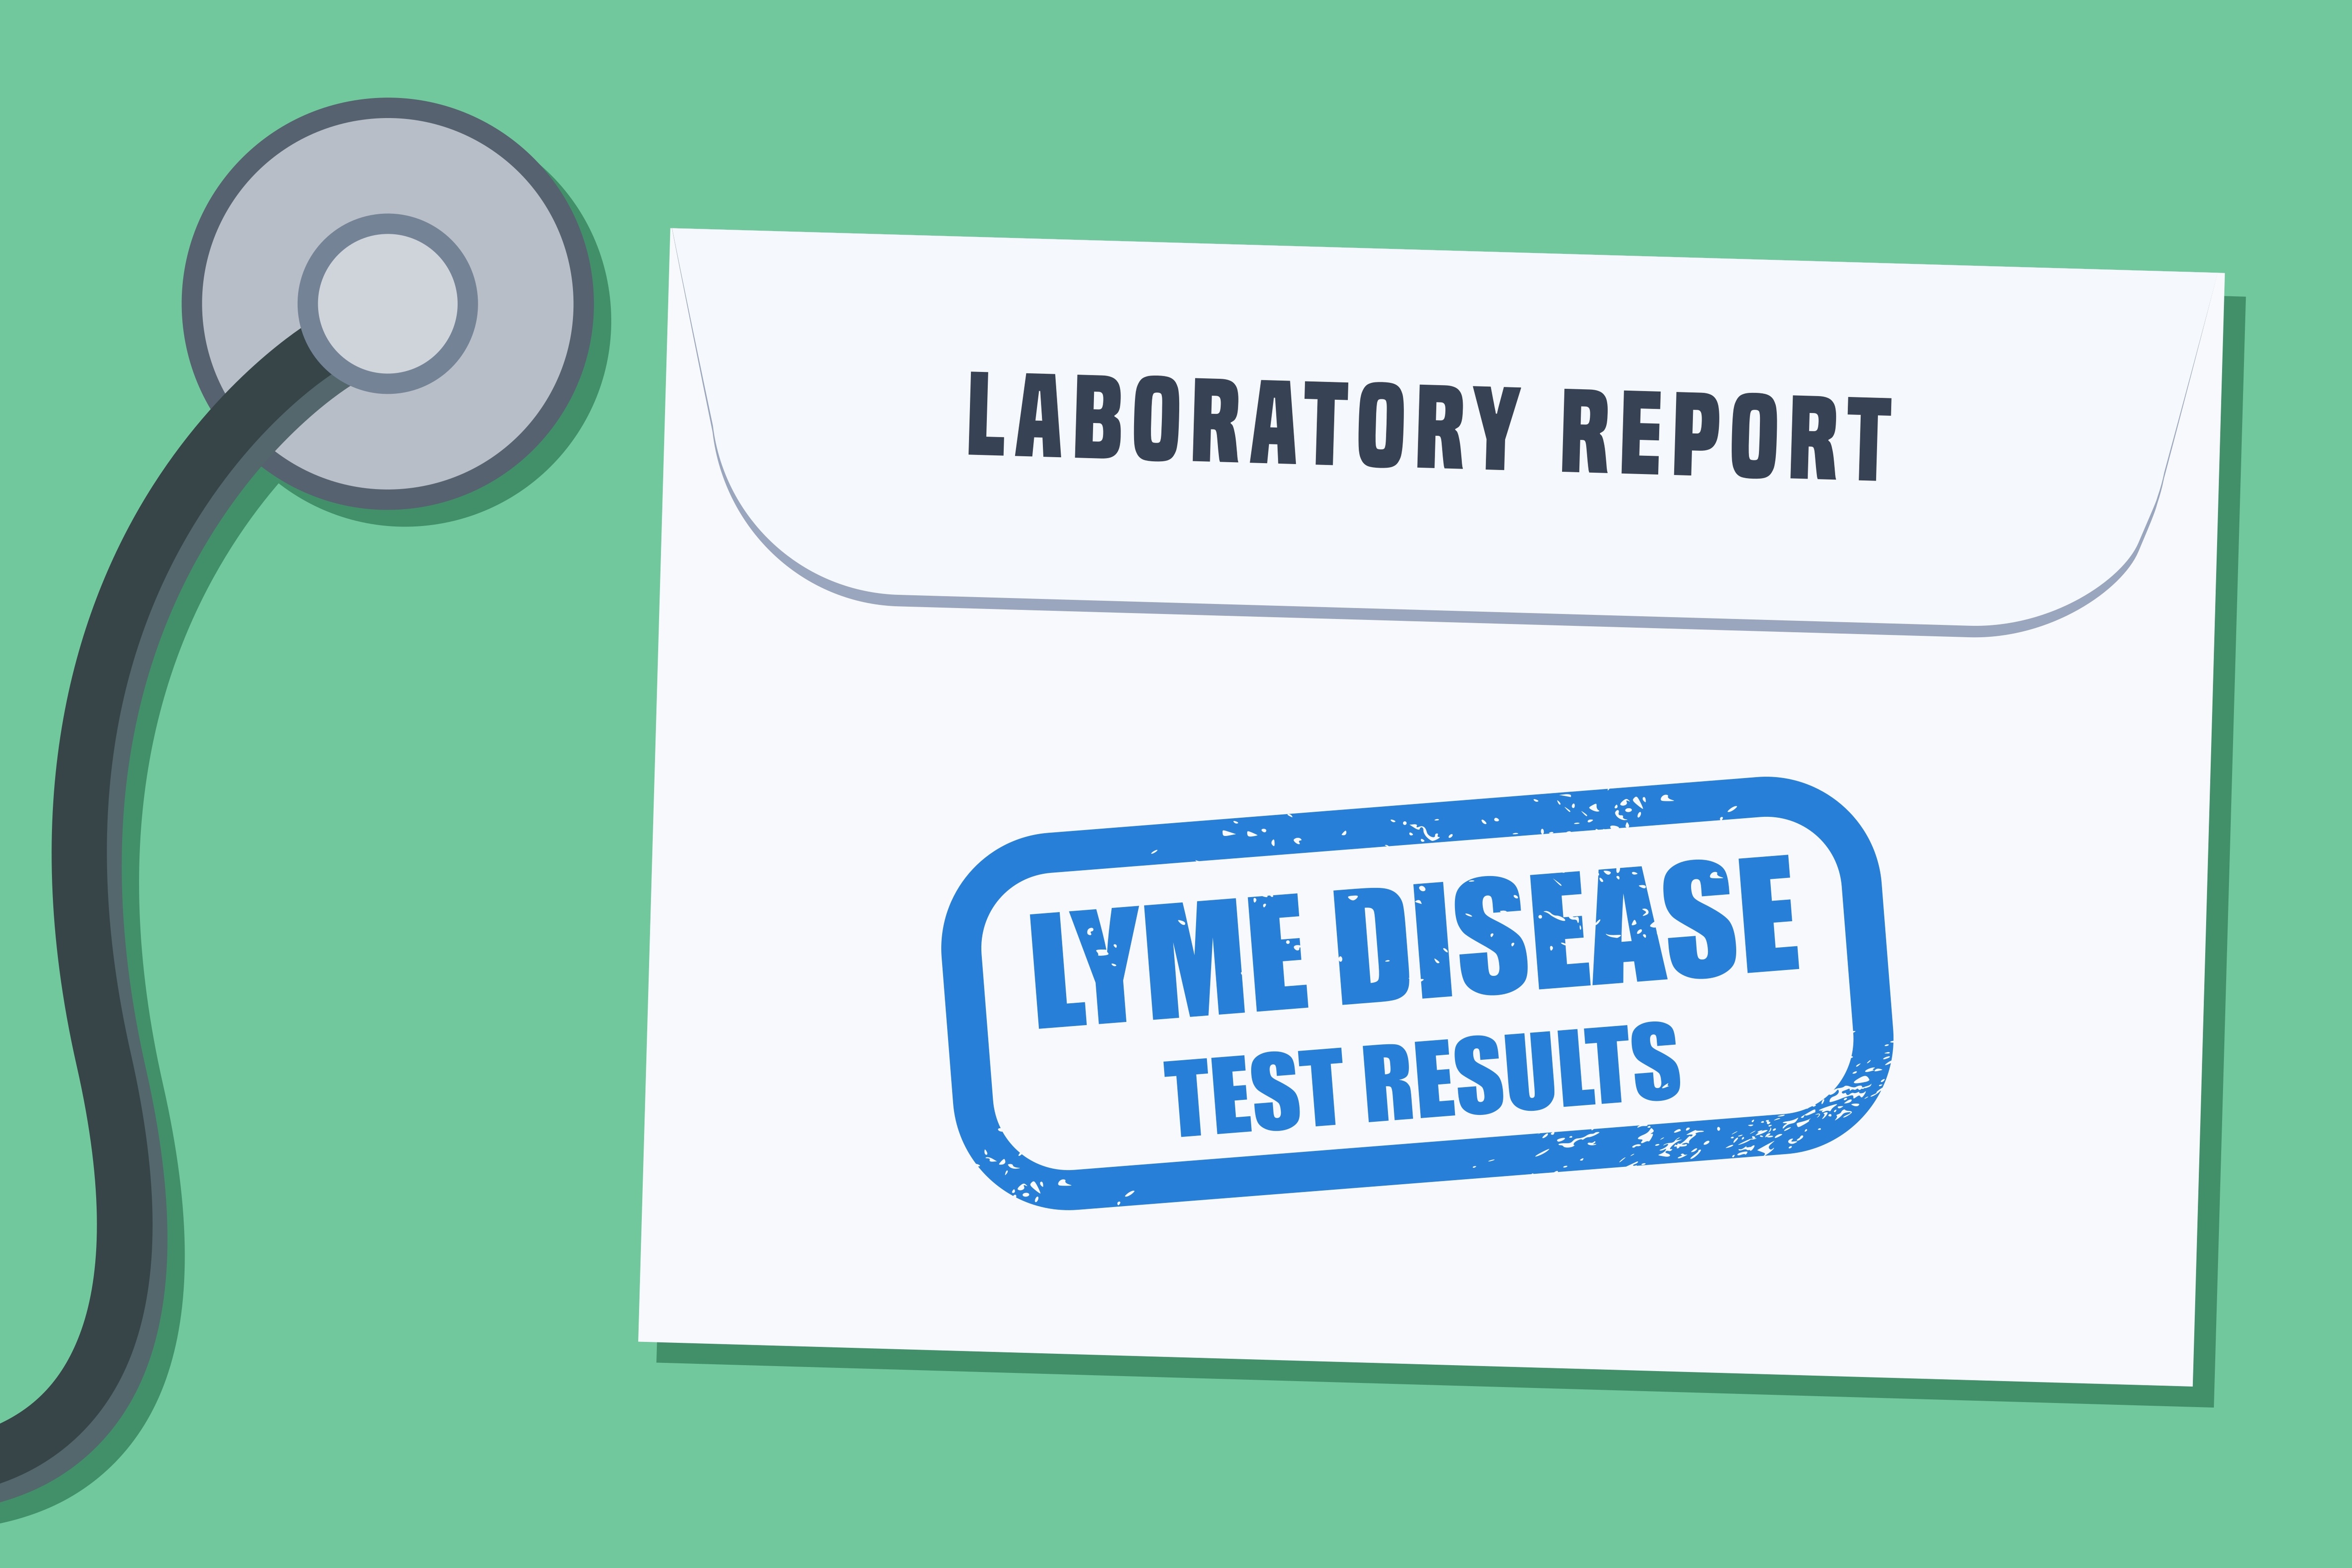 Problematic Lyme testing shortchanges patients, especially children